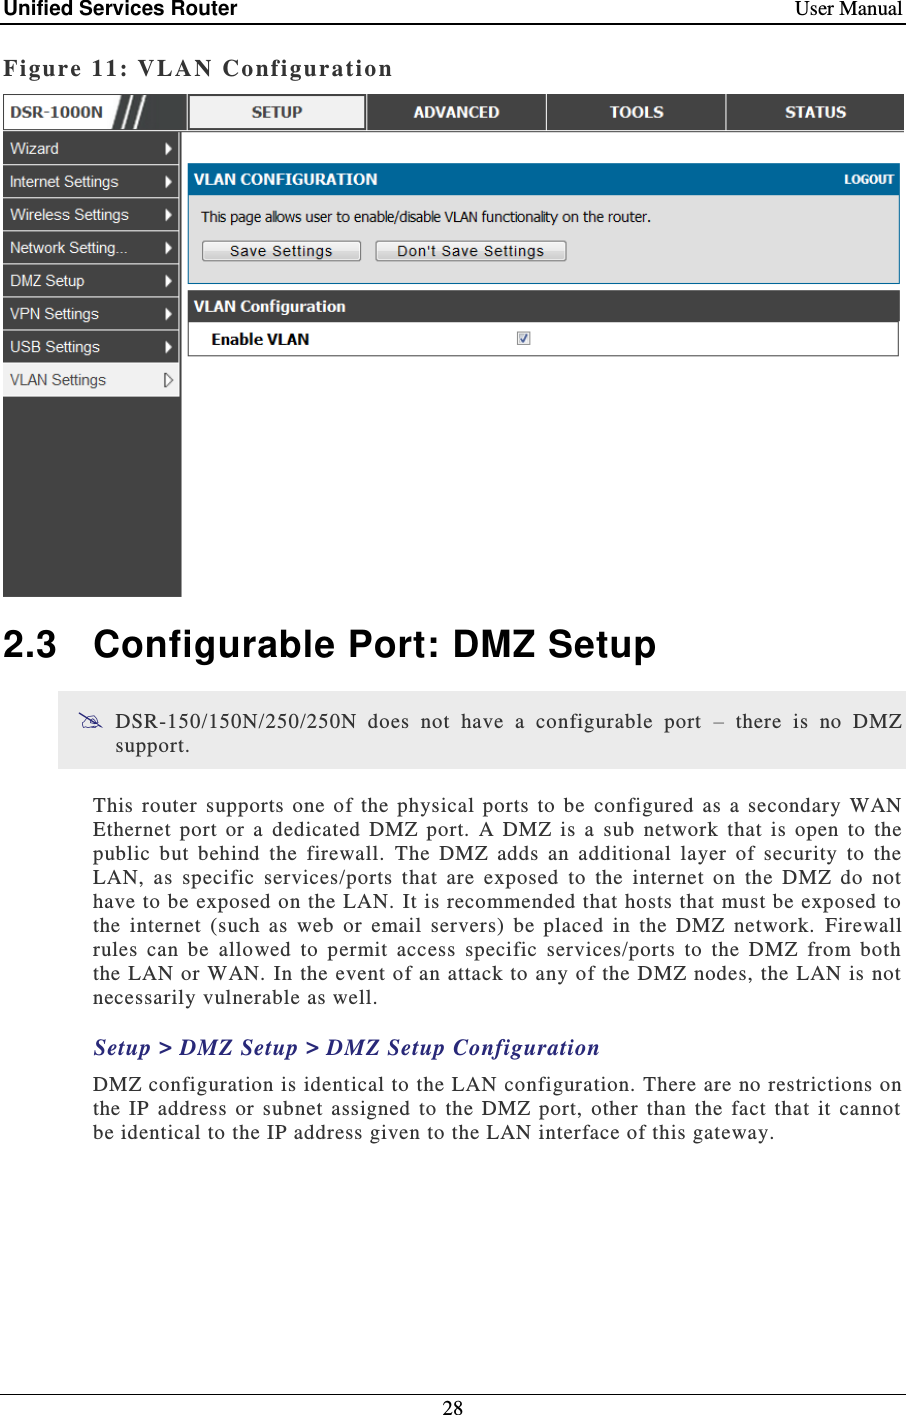 Unified Services Router    User Manual 28  Figure 11: VLA N  Configuration   2.3  Configurable Port: DMZ Setup  DSR-150/150N/250/250N  does  not  have  a  configurable  port  –  there  is  no  DMZ support. This  router  supports  one  of  the  physical  ports  to  be  configured  as  a  secondary  WAN Ethernet  port  or  a  dedicated  DMZ  port.  A  DMZ  is  a  sub  network  that  is  open  to  the public  but  behind  the  firewall.  The  DMZ  adds  an  additional  layer  of  security  to  the LAN,  as  specific  services/ports  that  are  exposed  to  the  internet  on  the  DMZ  do  not have to be exposed on the LAN. It is recommended that hosts that must be exposed to the  internet  (such  as  web  or  email  servers)  be  placed  in  the  DMZ  network.  Firewall rules  can  be  allowed  to  permit  access  specific  services/ports  to  the  DMZ  from  both the LAN or WAN. In the event of an attack to any of the DMZ nodes, the LAN is not necessarily vulnerable as well.  Setup &gt; DMZ Setup &gt; DMZ Setup Configuration DMZ configuration is identical to the LAN  configuration. There are no restrictions on the  IP  address  or  subnet  assigned  to  the  DMZ  port,  other  than  the  fact  that  it  cannot be identical to the IP address given to the LAN interface of this gateway.   